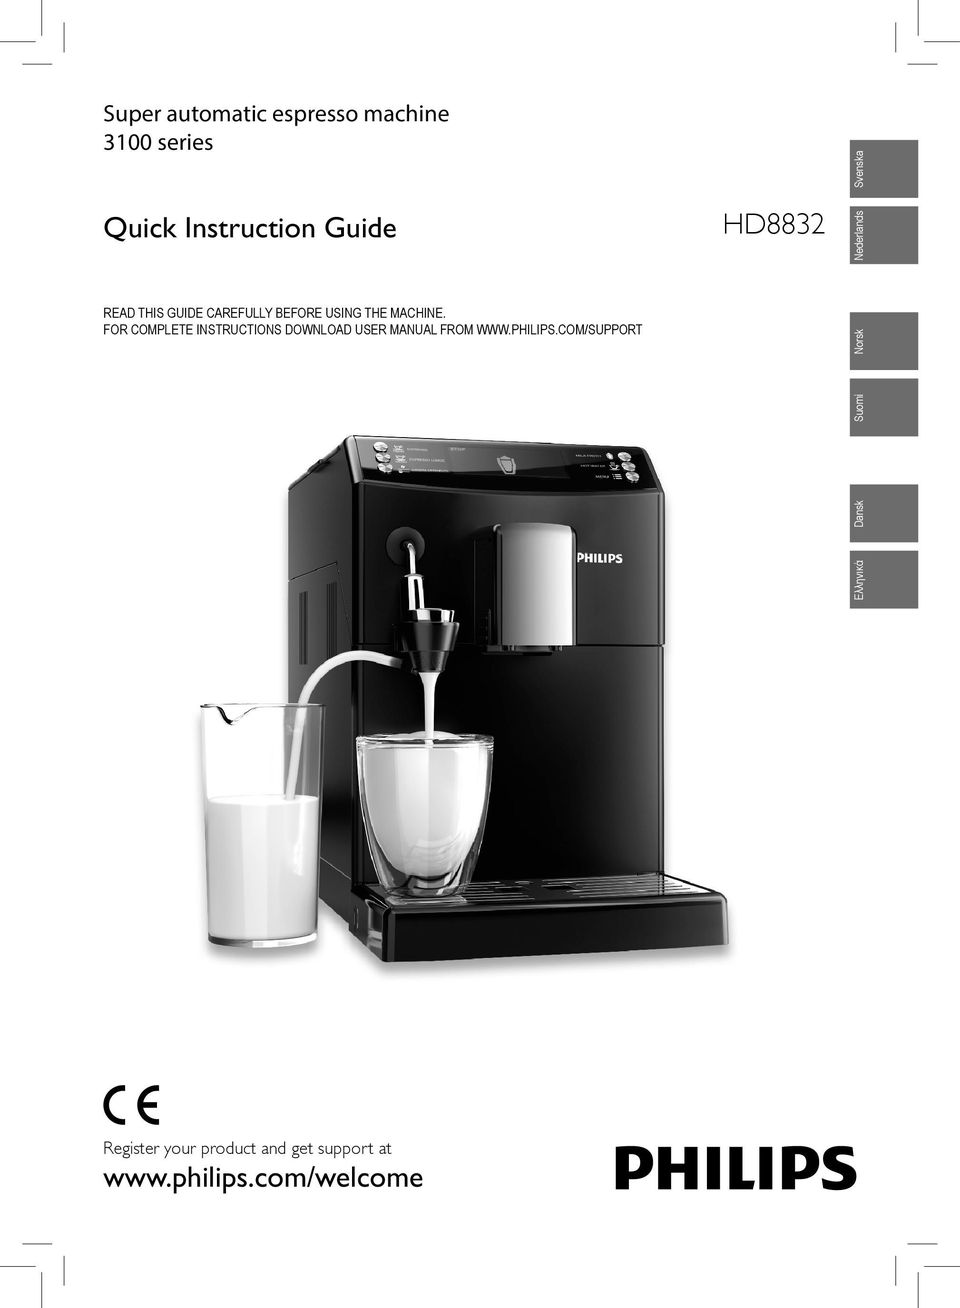 FOR COMPLETE INSTRUCTIONS DOWOAD USER MANUAL FROM WWW.PHILIPS.